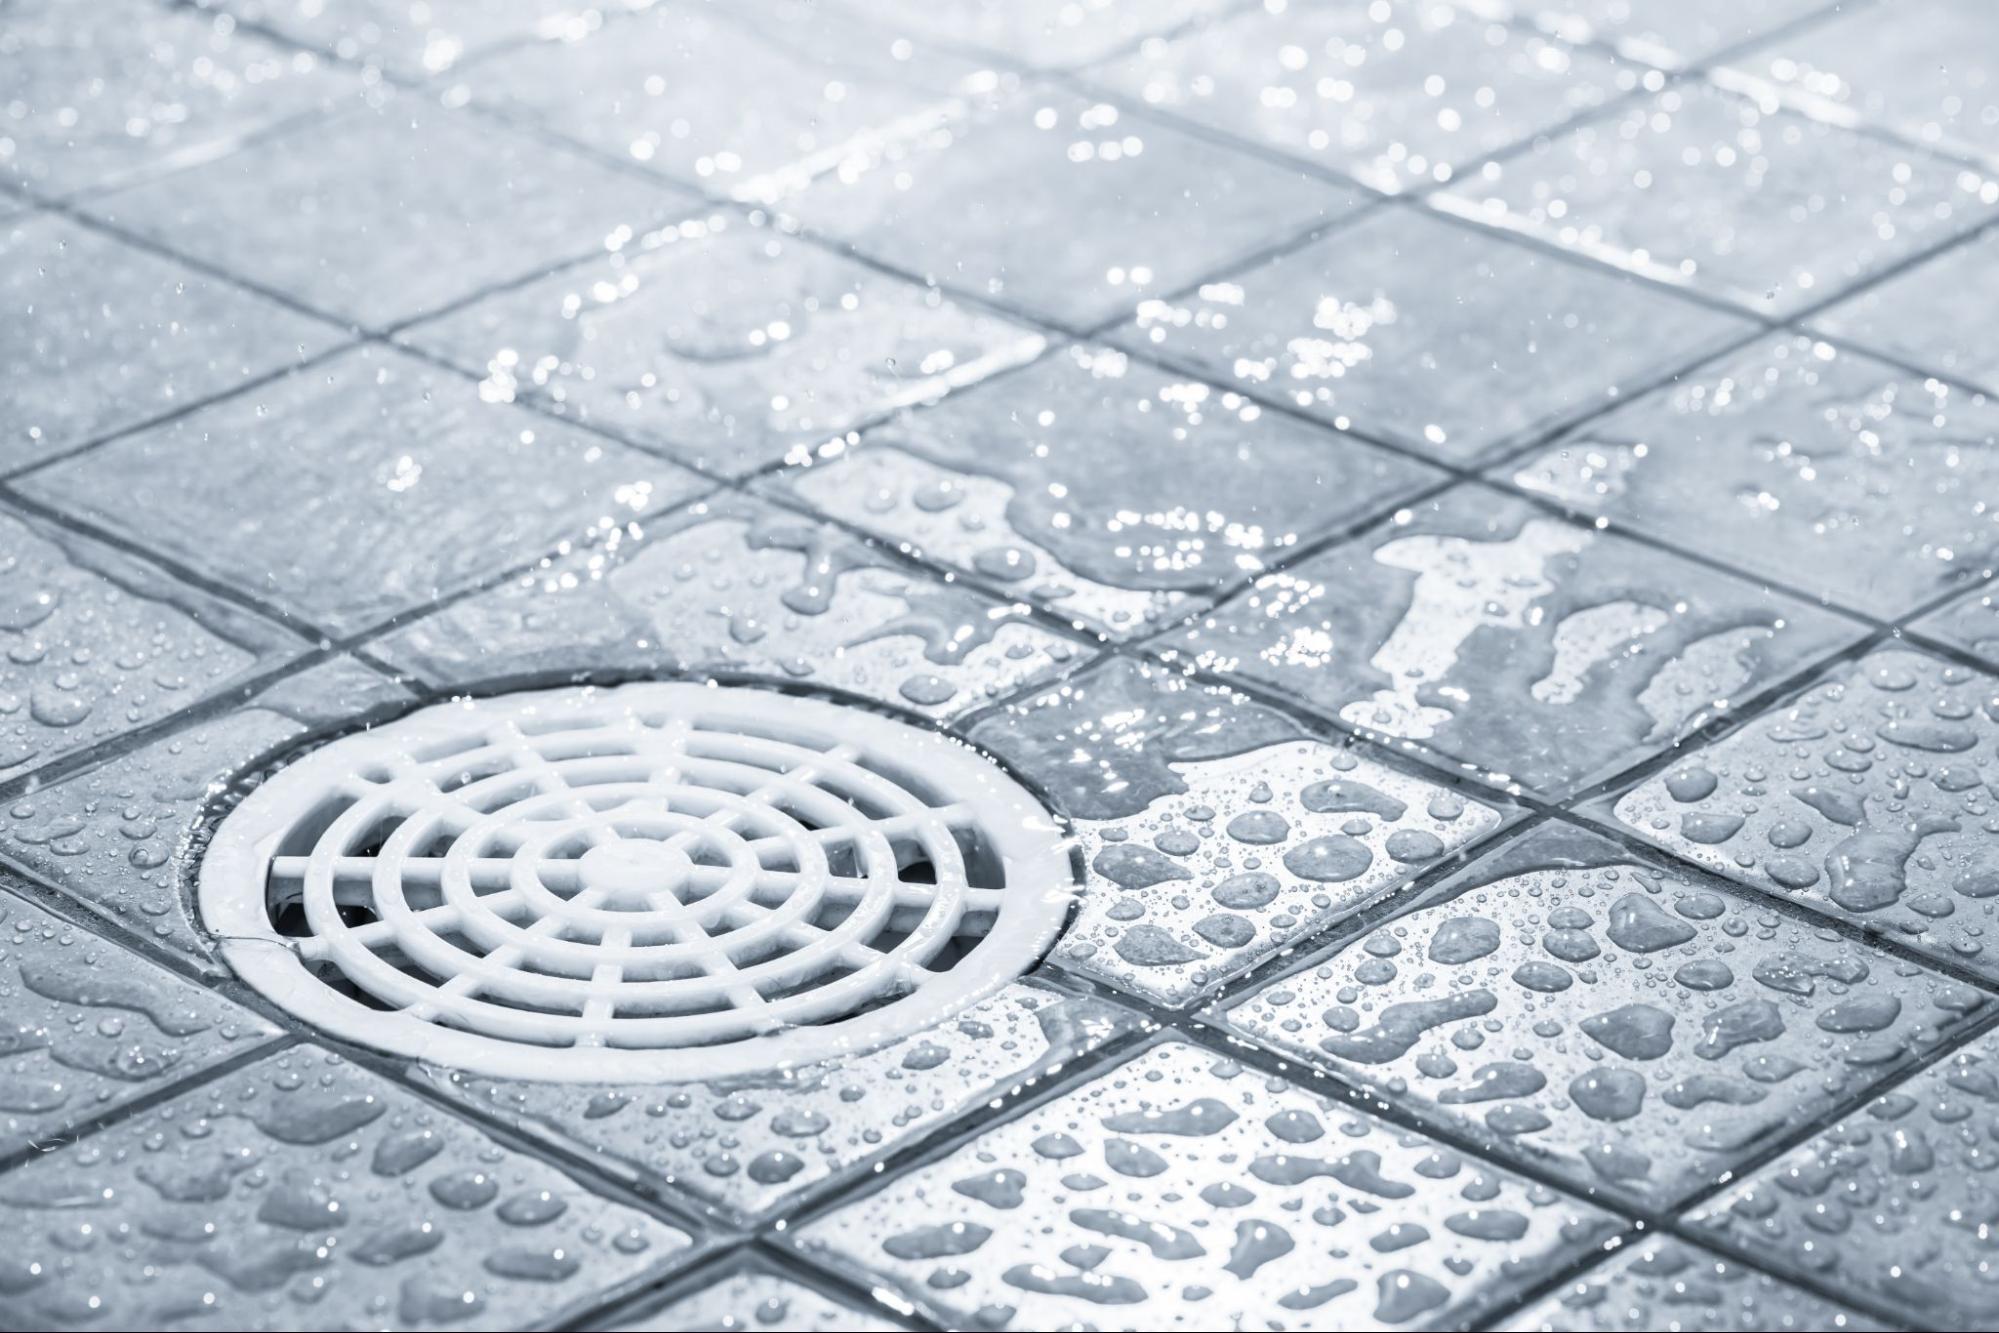 How to Unclog Shower Drains